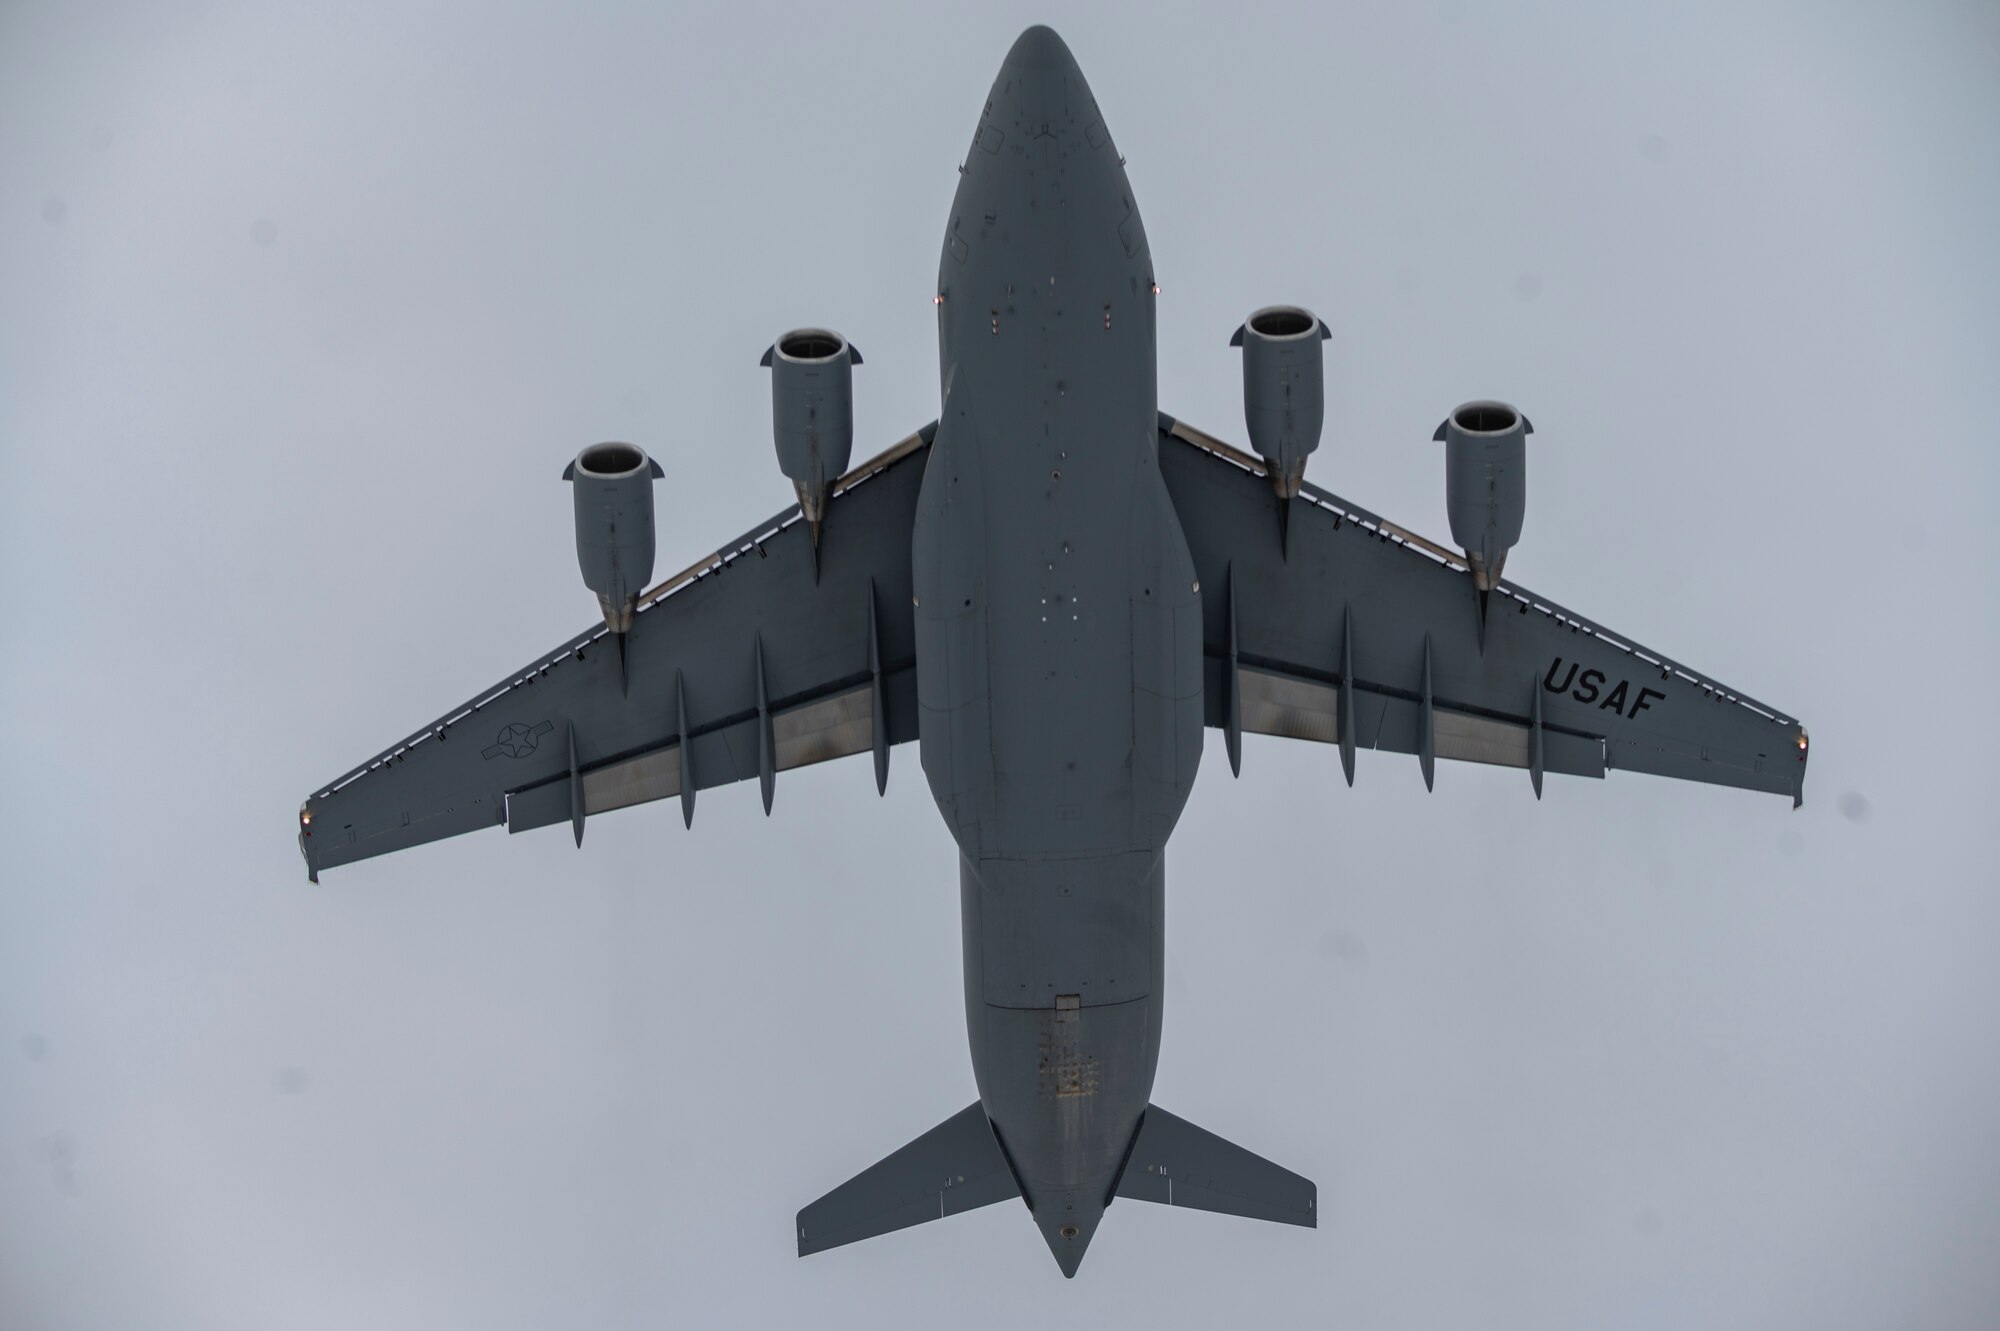 A C-17 Globemaster III assigned to Joint Base Lewis-McChord, Washington, takes off from a runway during Exercise Rainier War 22A at Joint Base Elmendorf-Richardson, Alaska, March 18, 2022. The exercise is designed to demonstrate the wing’s ability to operate and survive while defeating challenges to the U.S. military advantage in all operating domains – air, land, sea and cyberspace.(U.S. Air Force photo by Airman 1st Class Charles Casner)